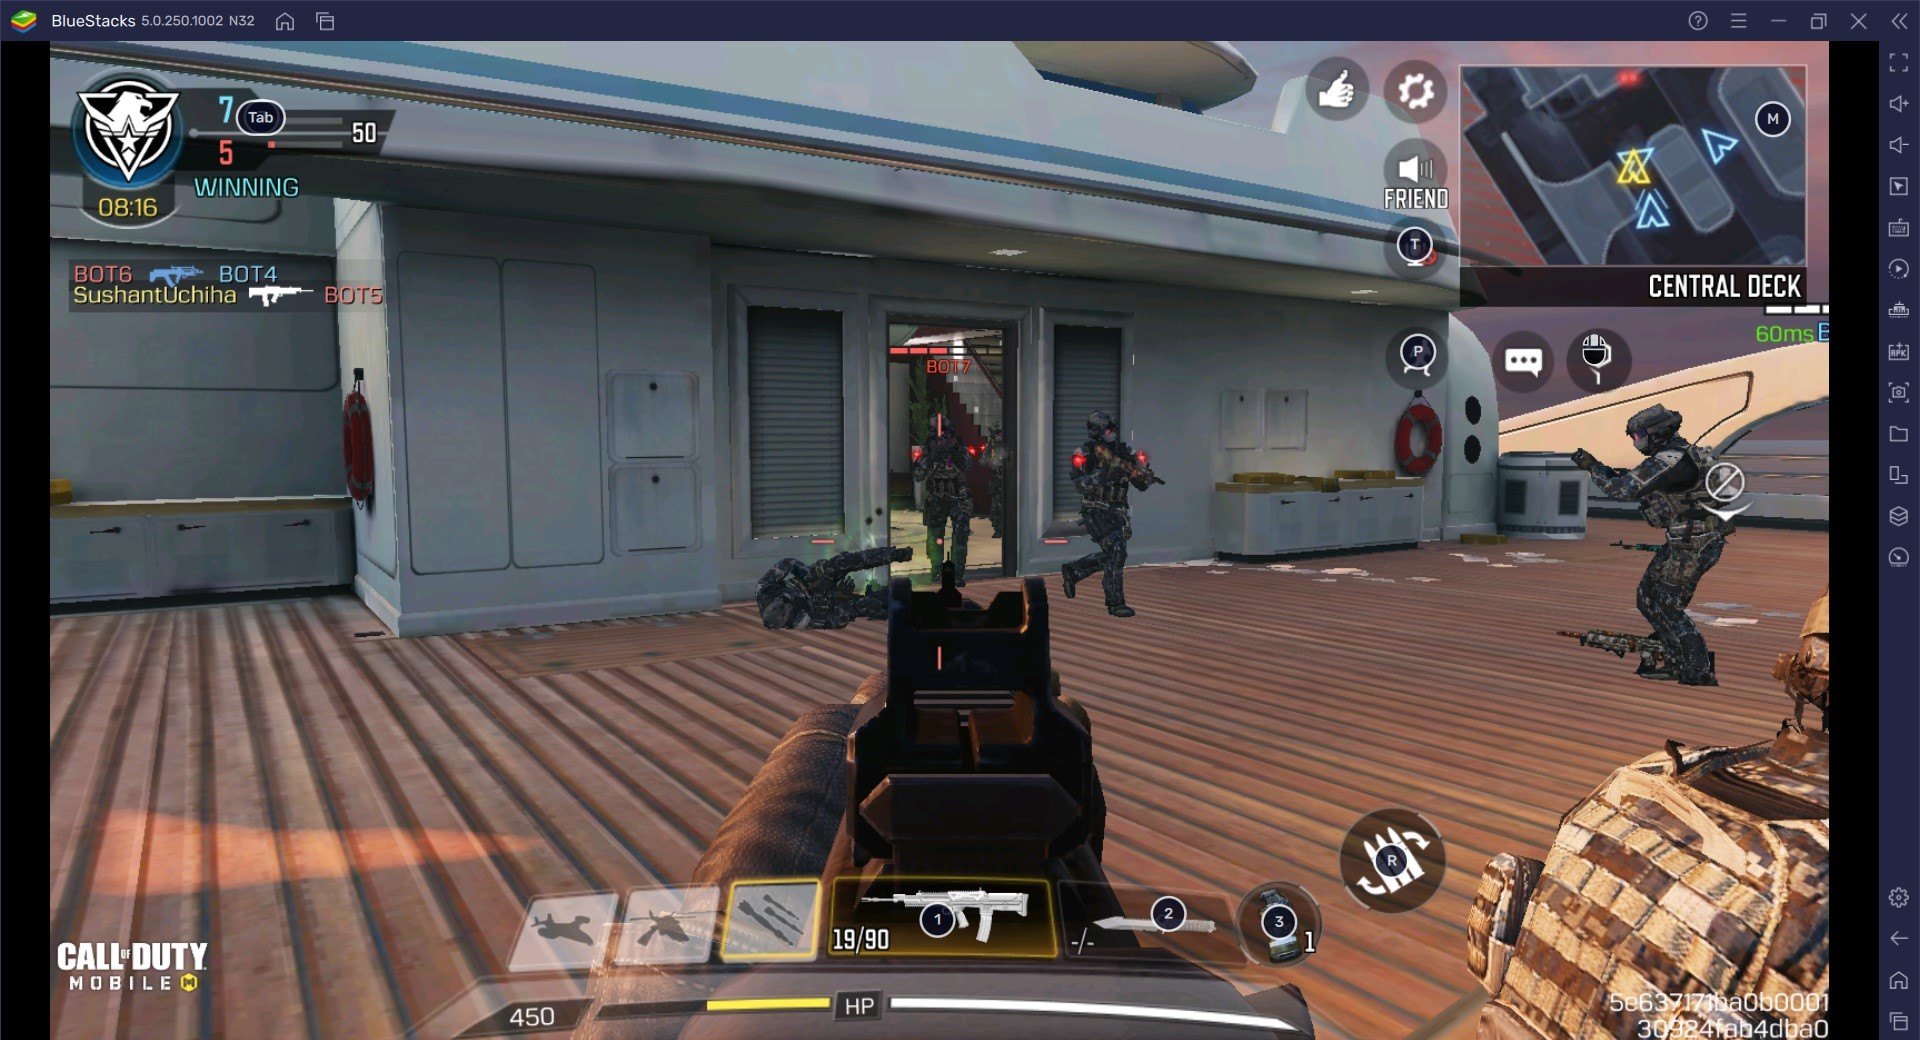 Call of Duty: Mobile Weapon Gunsmith Guide -- Holger 26 is the New Chopper